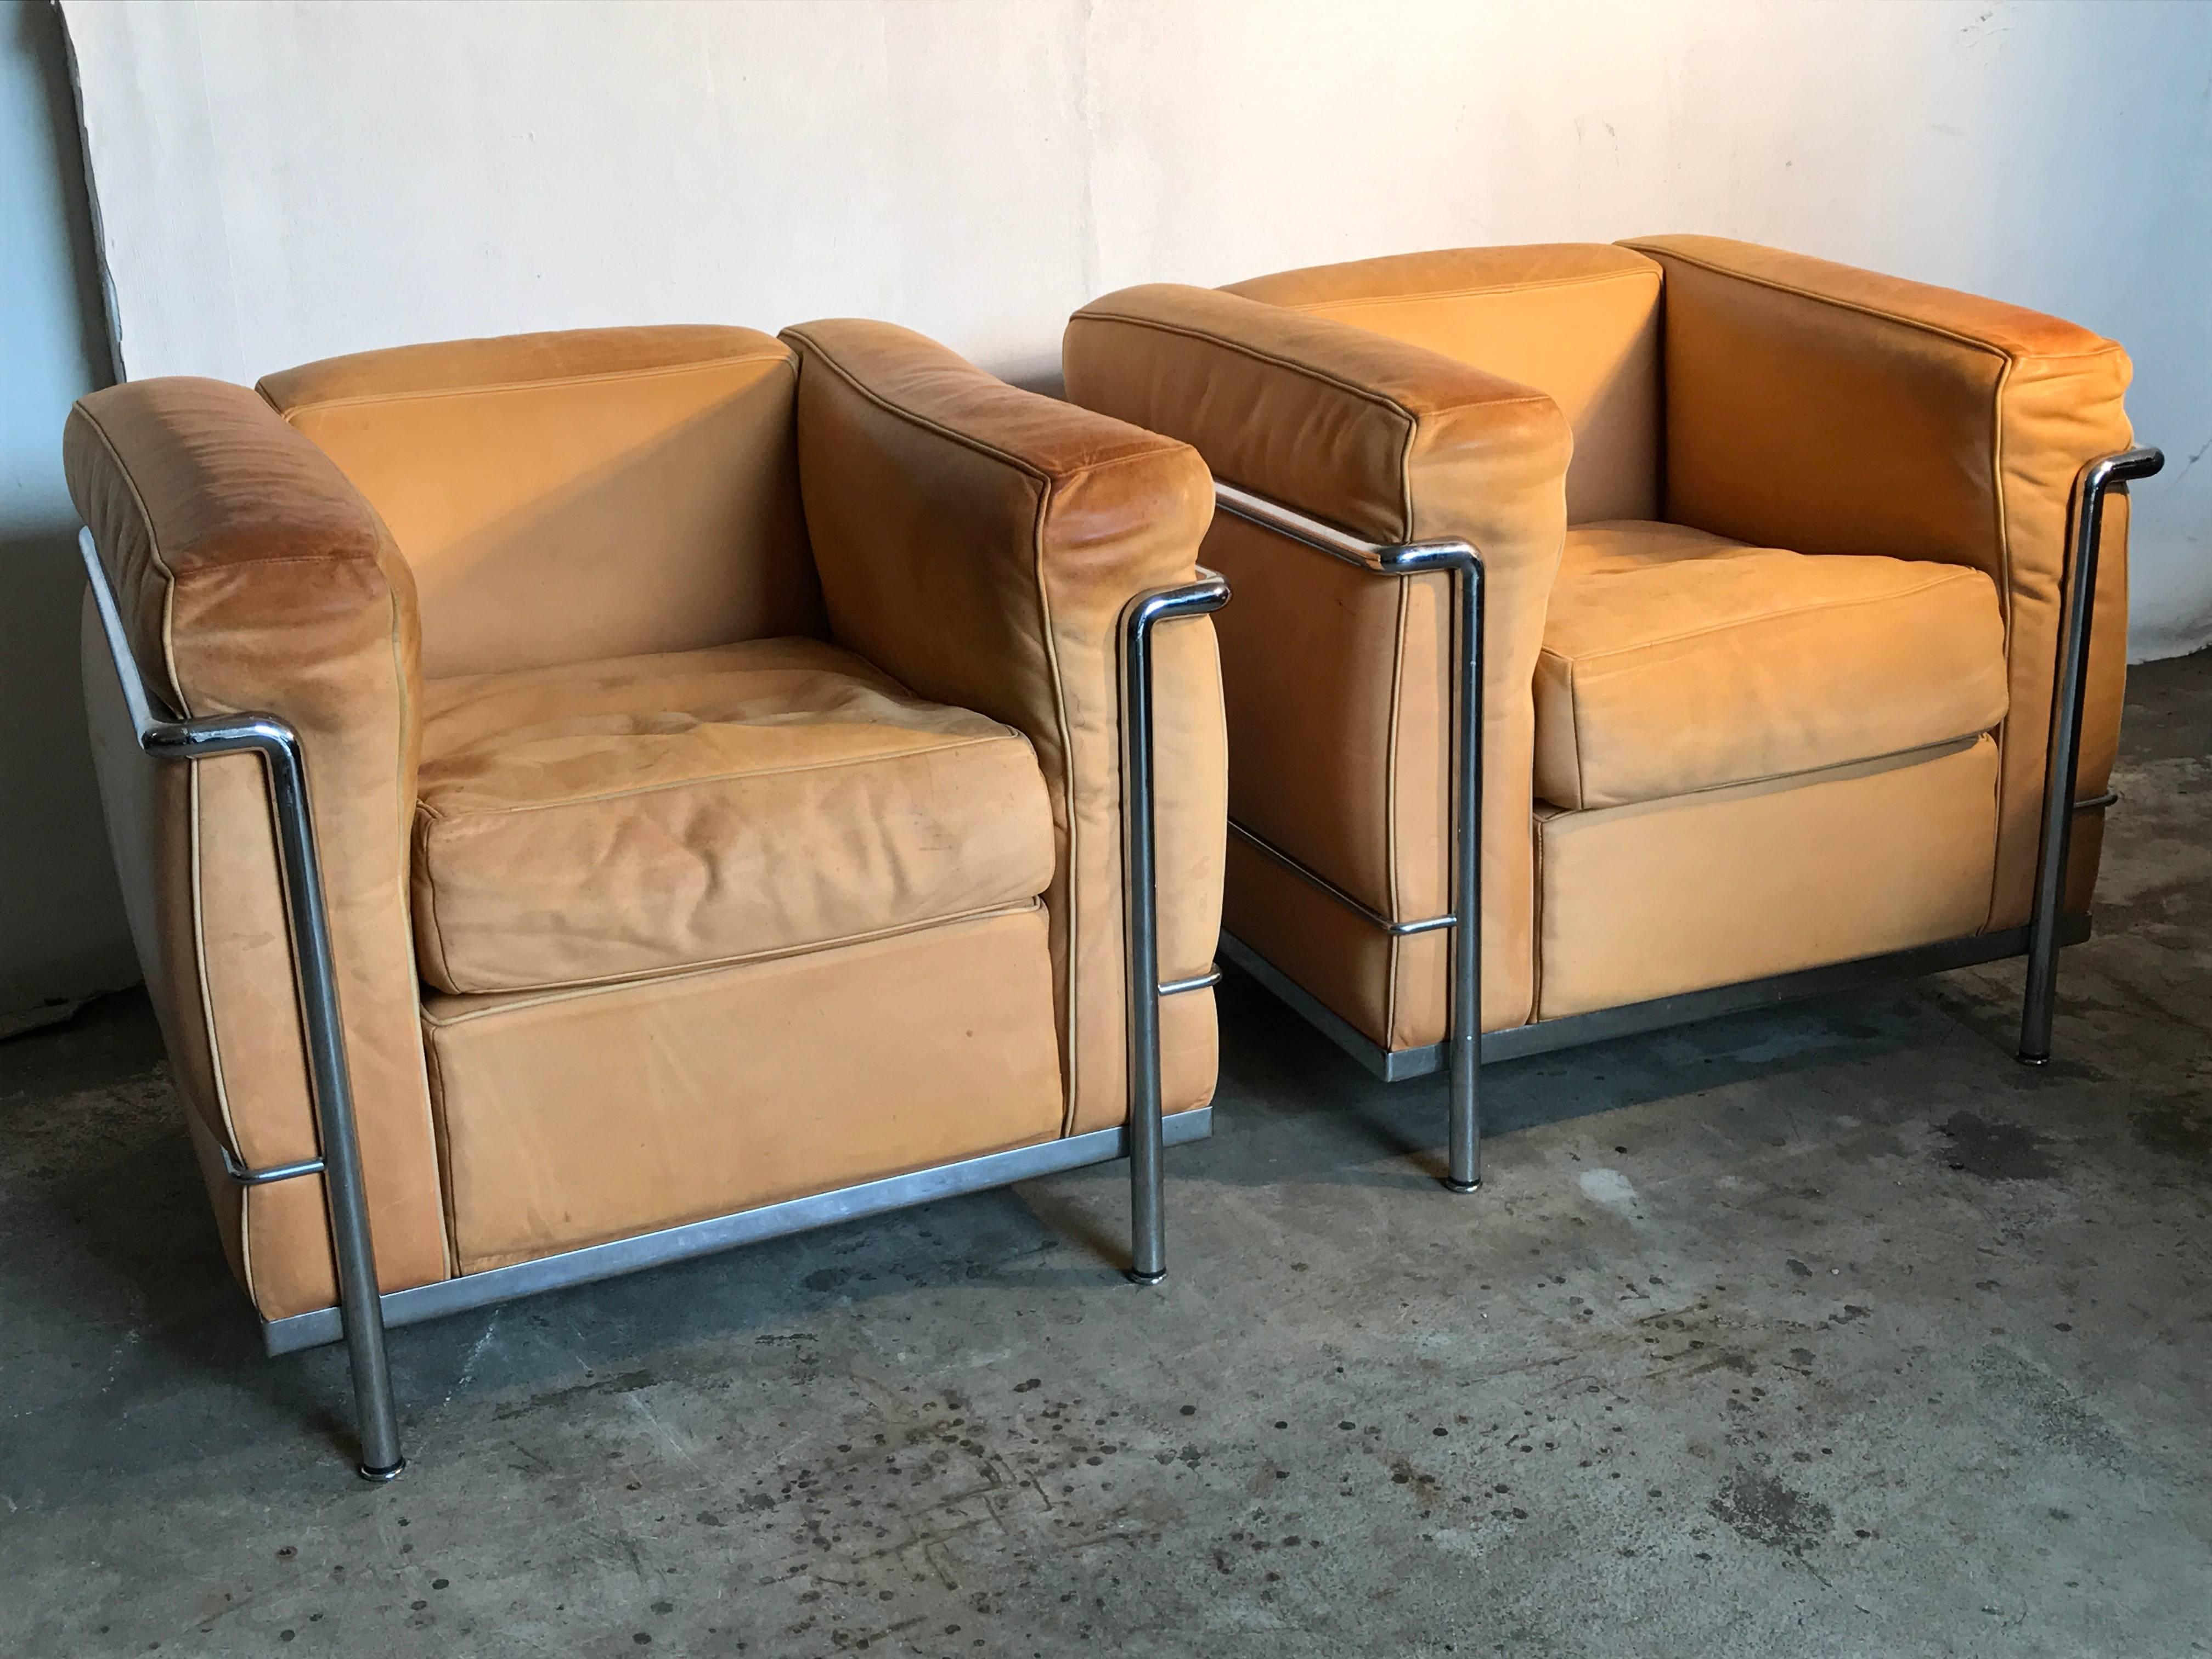 Two beautiful natural leather LC2 lounge chairs original by Cassina
design 1928 by architect Le Corbusier
Leather very nice patinated 
production from the late 1980s
menufacter marked ingraved in the metal frame.